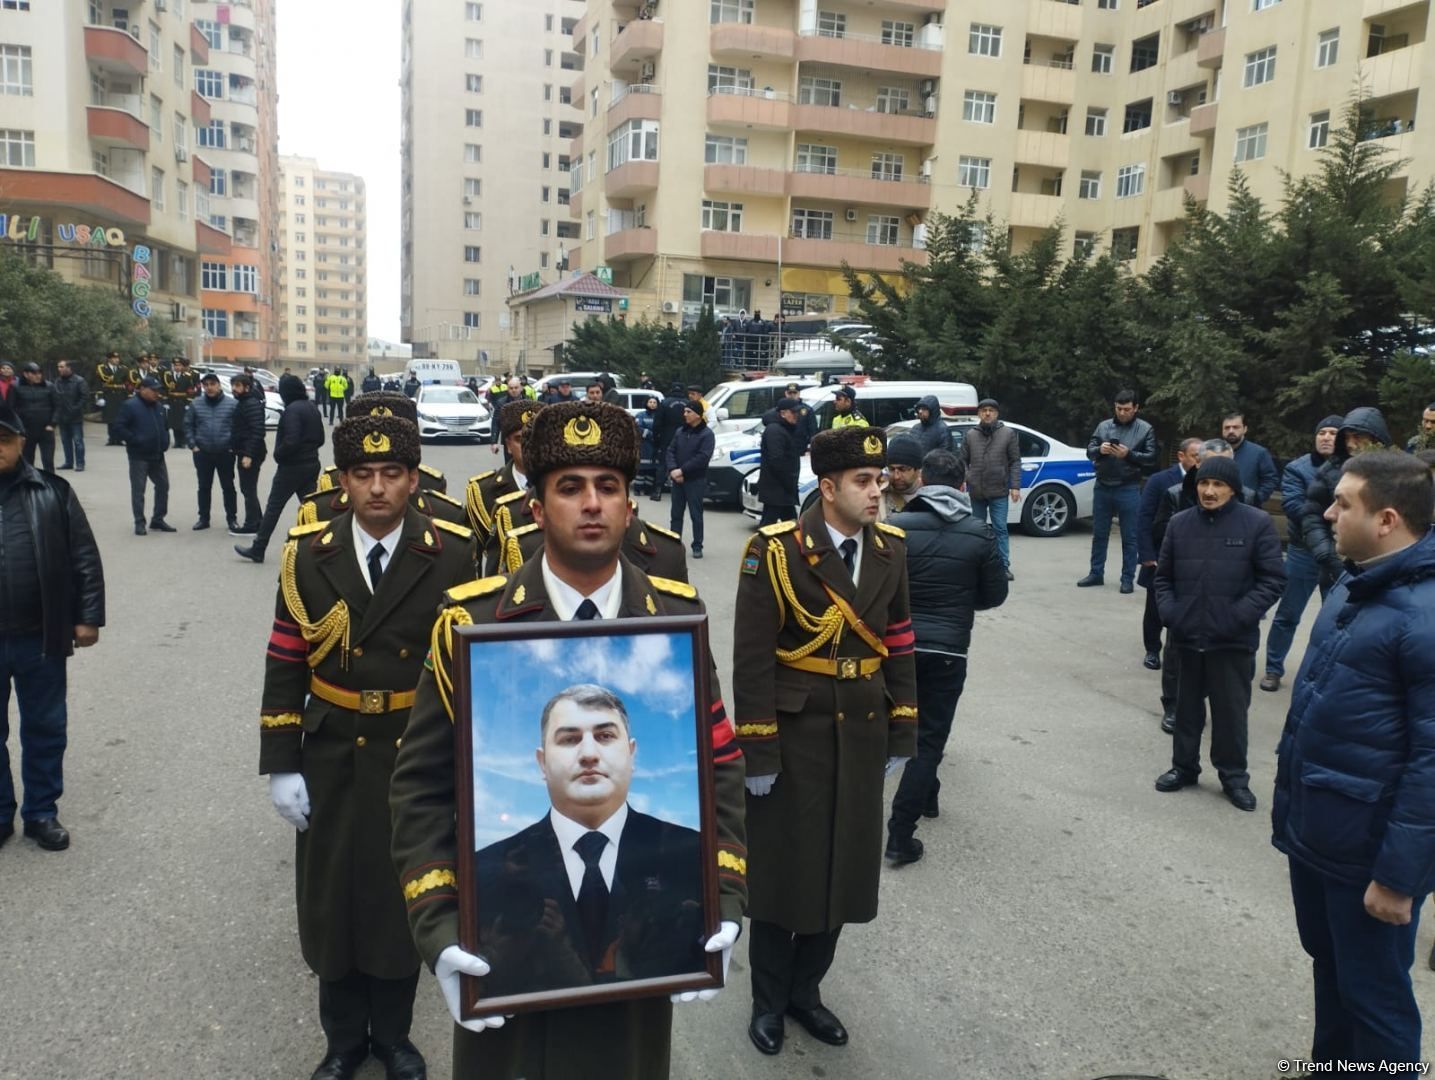 Nation bidding farewell to security officer killed in preventing armed attack on Tehran embassy